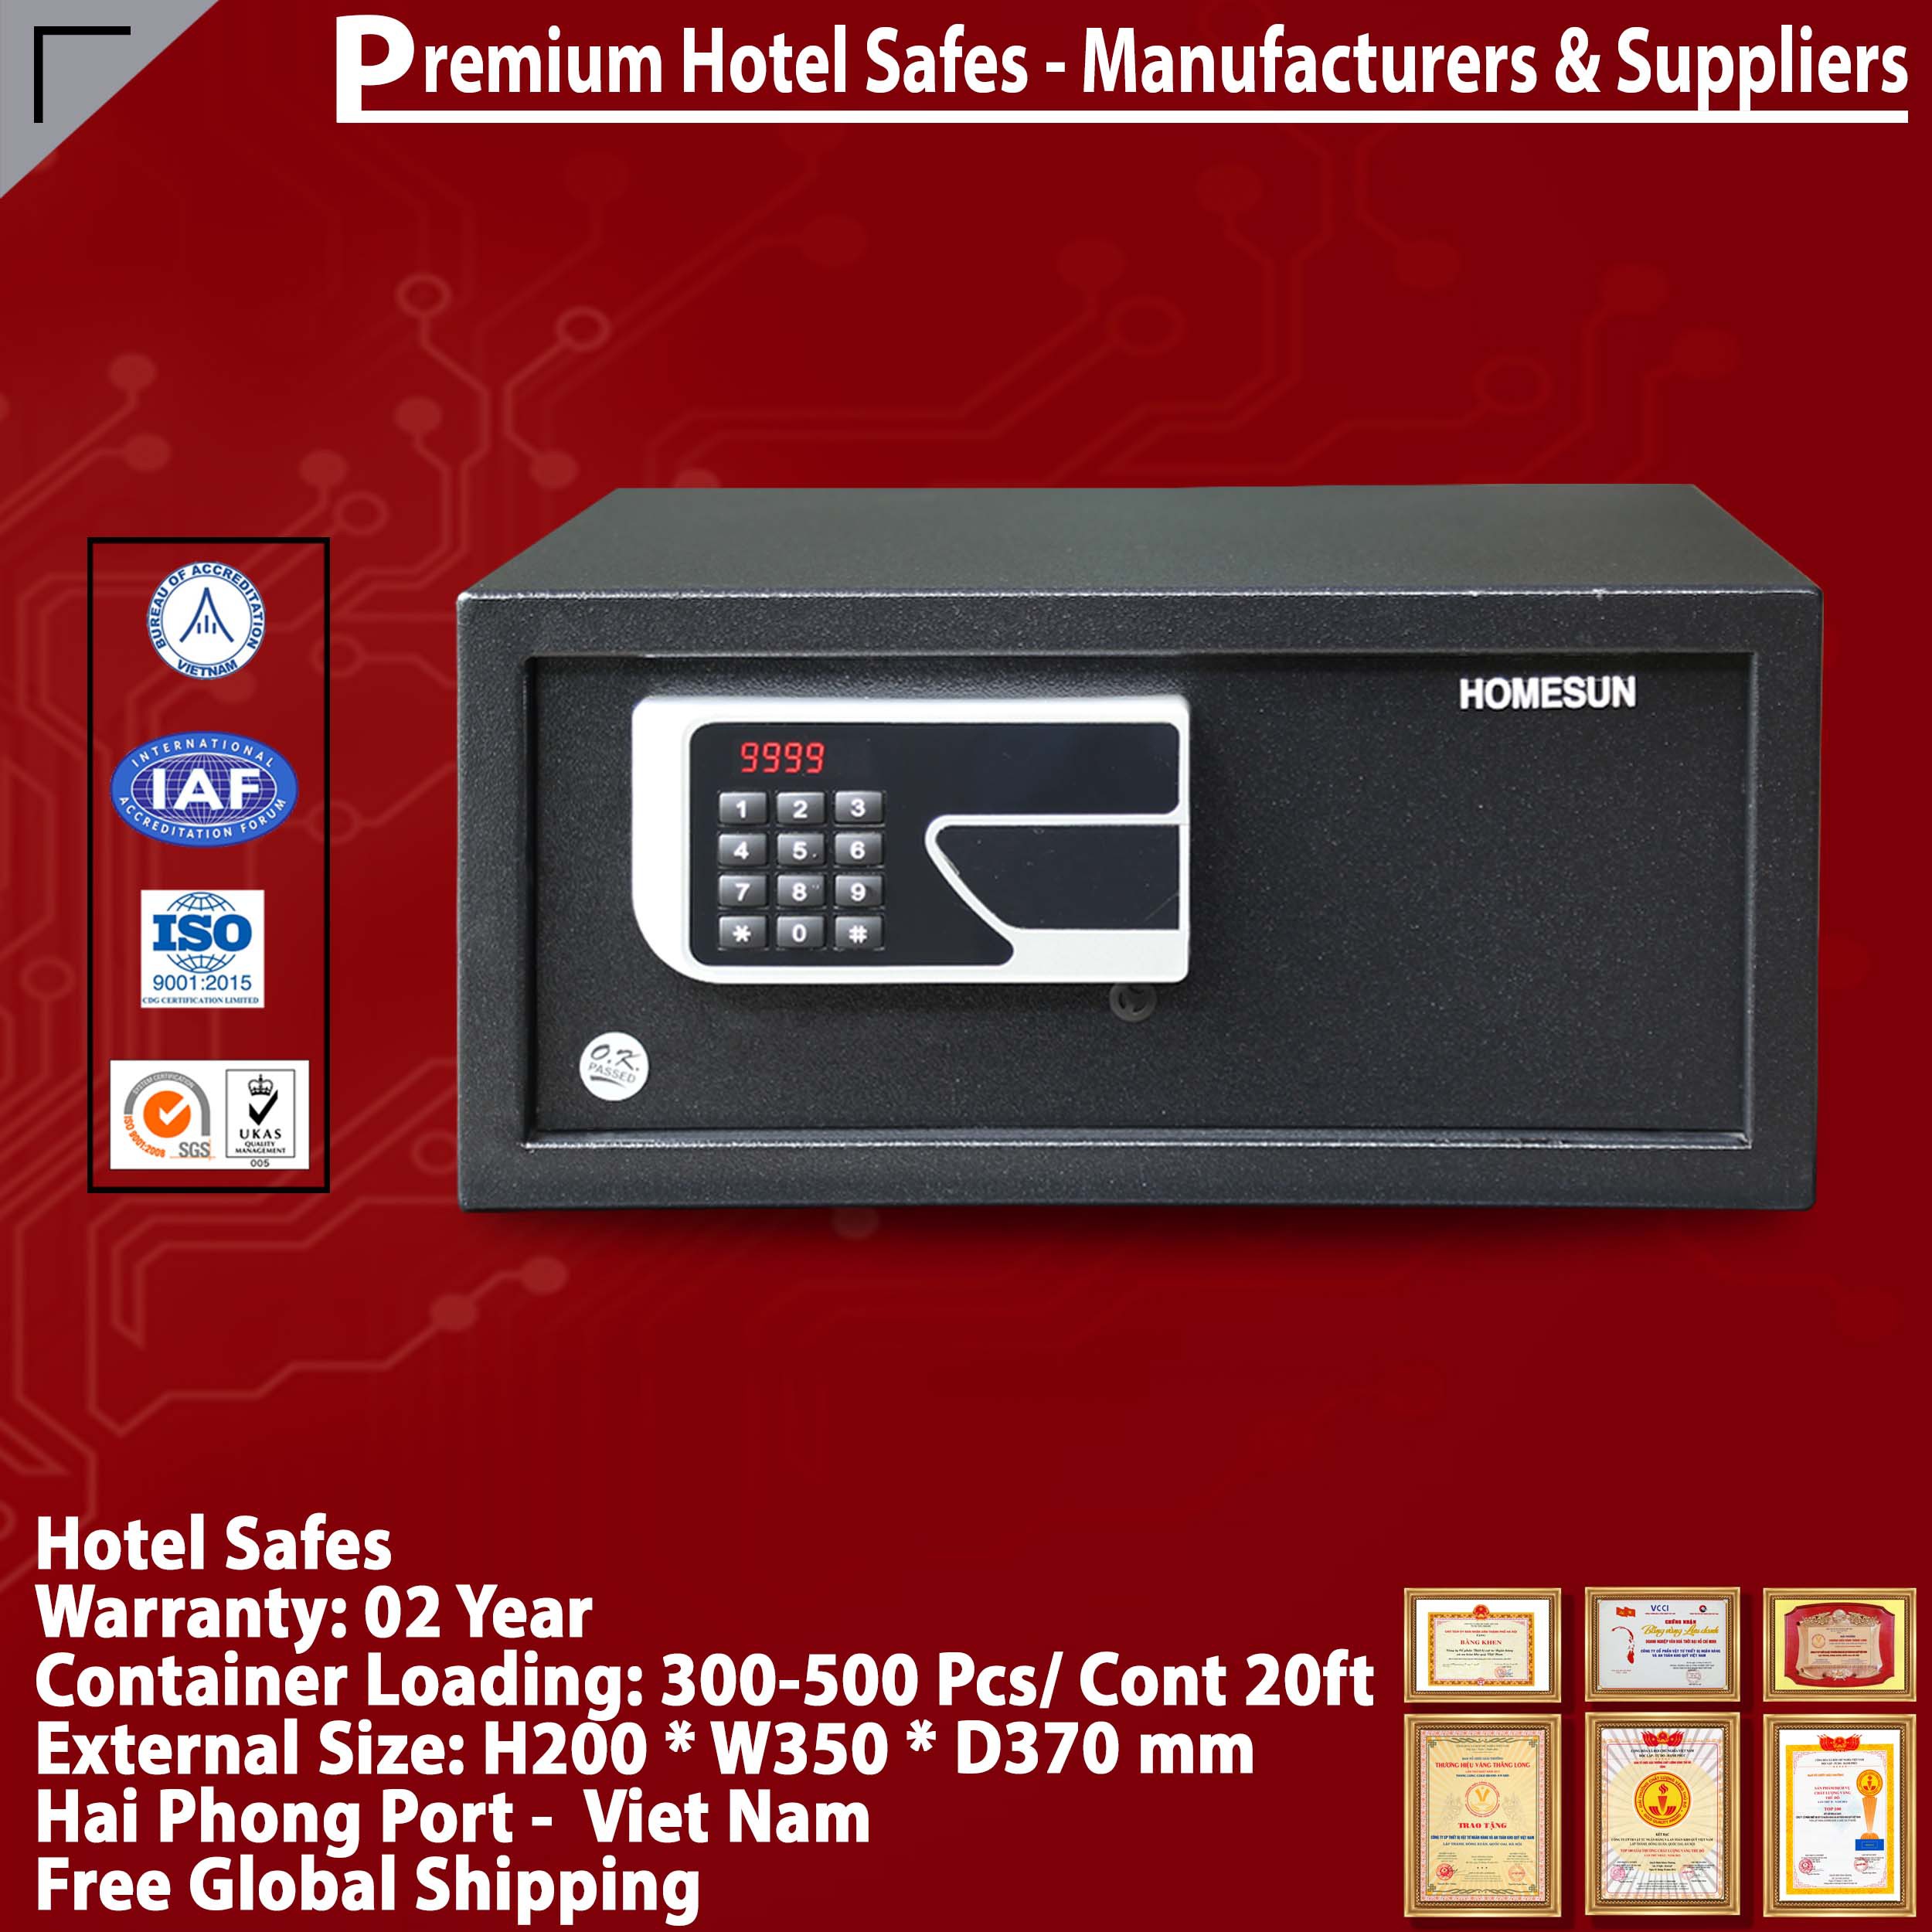 Best Sellers In Hotel SafesFactory Direct & Fast Shipping‎ WELKO